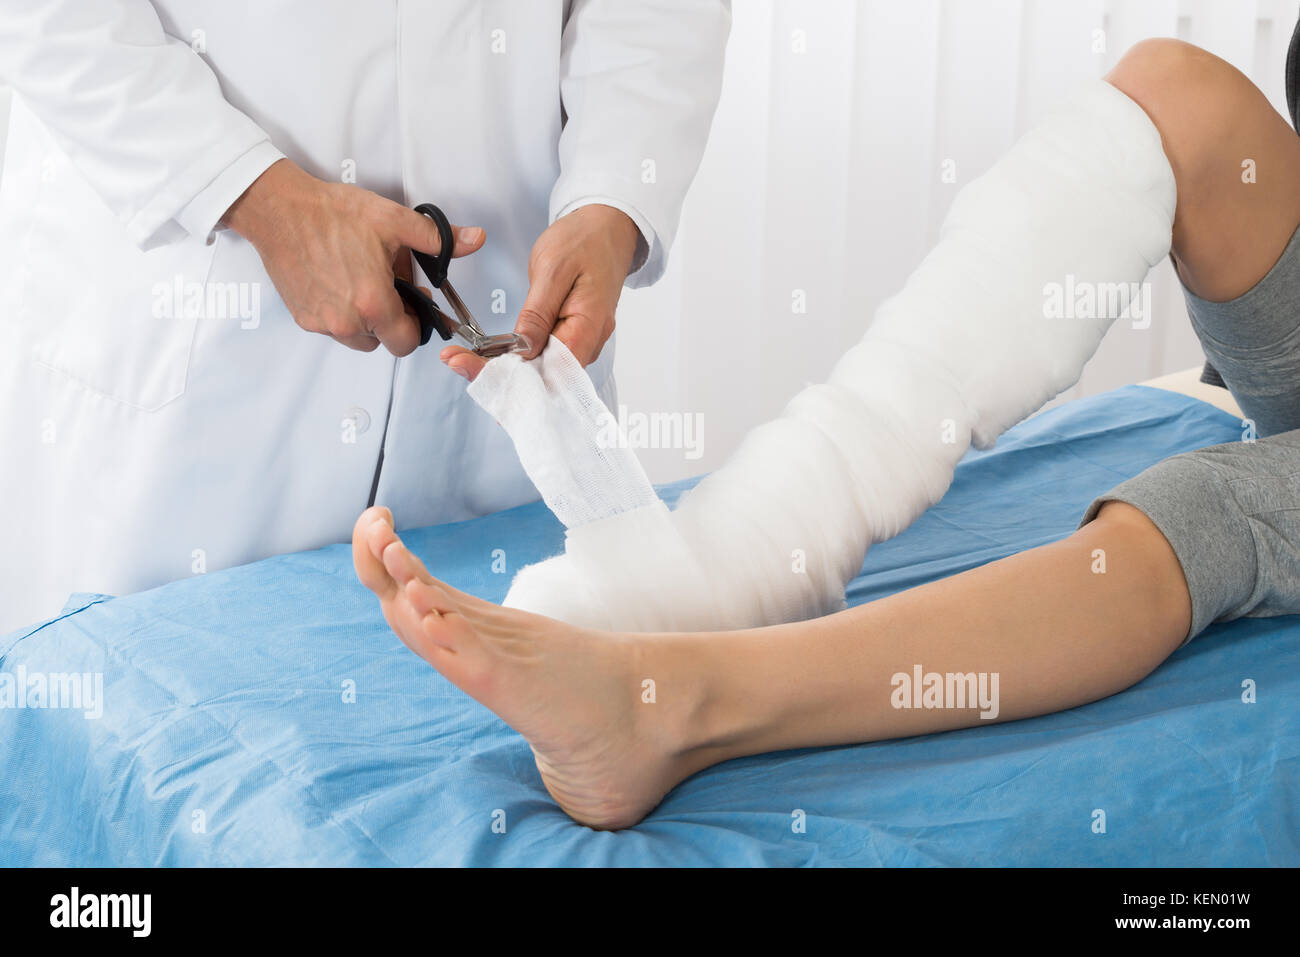 Doctor Bandaging Leg Of Patient In Hospital Stock Photo